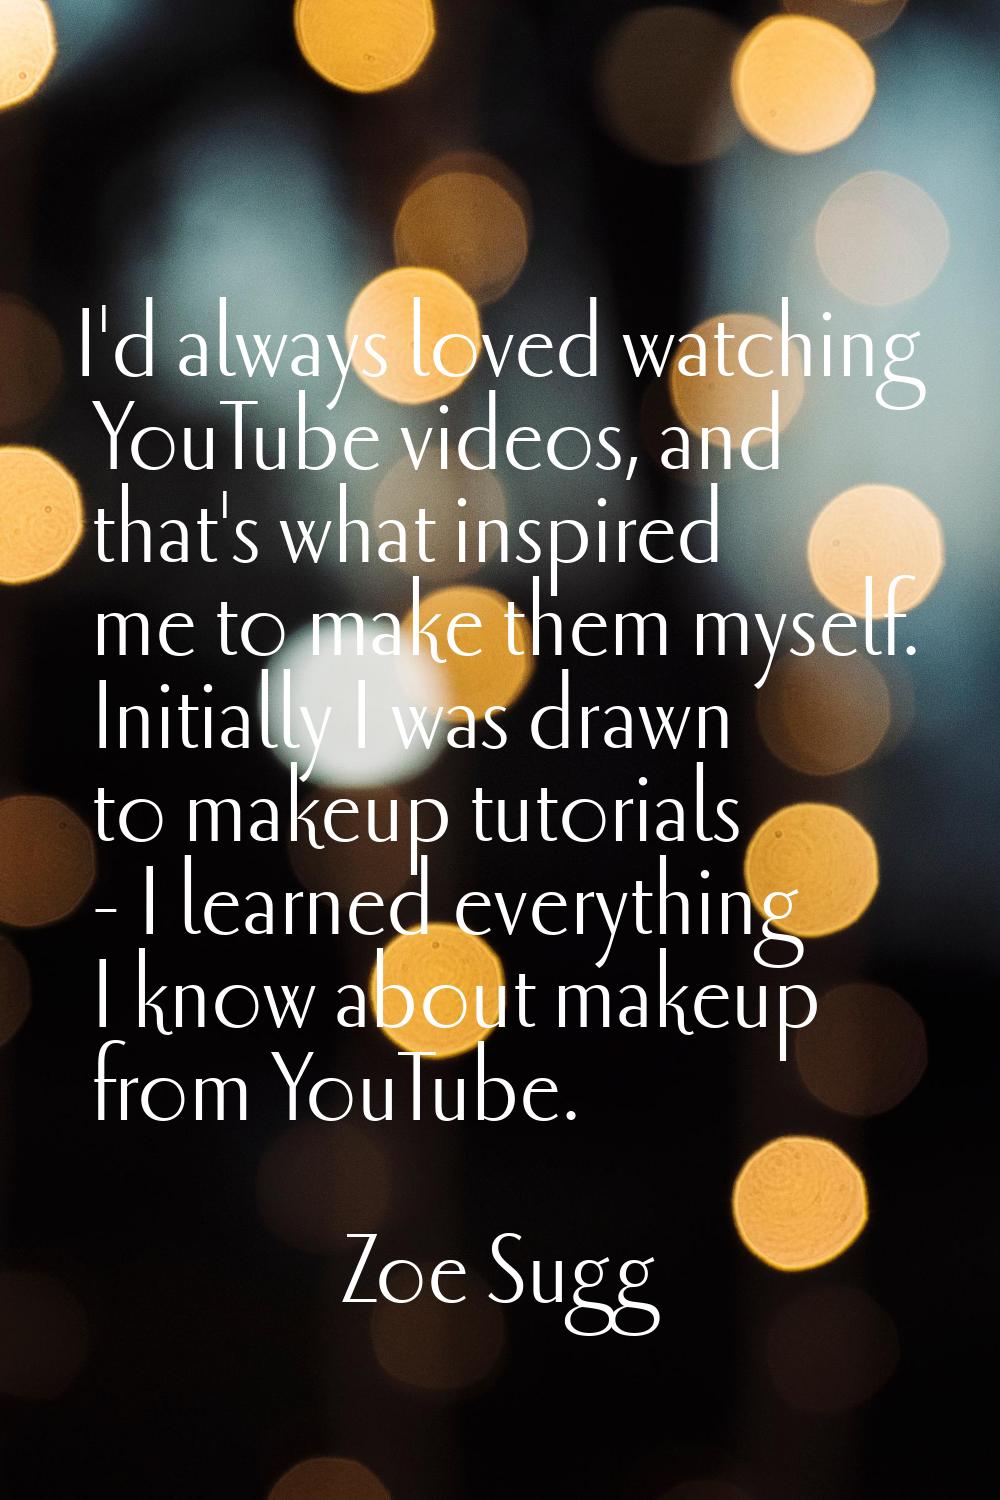 I'd always loved watching YouTube videos, and that's what inspired me to make them myself. Initiall